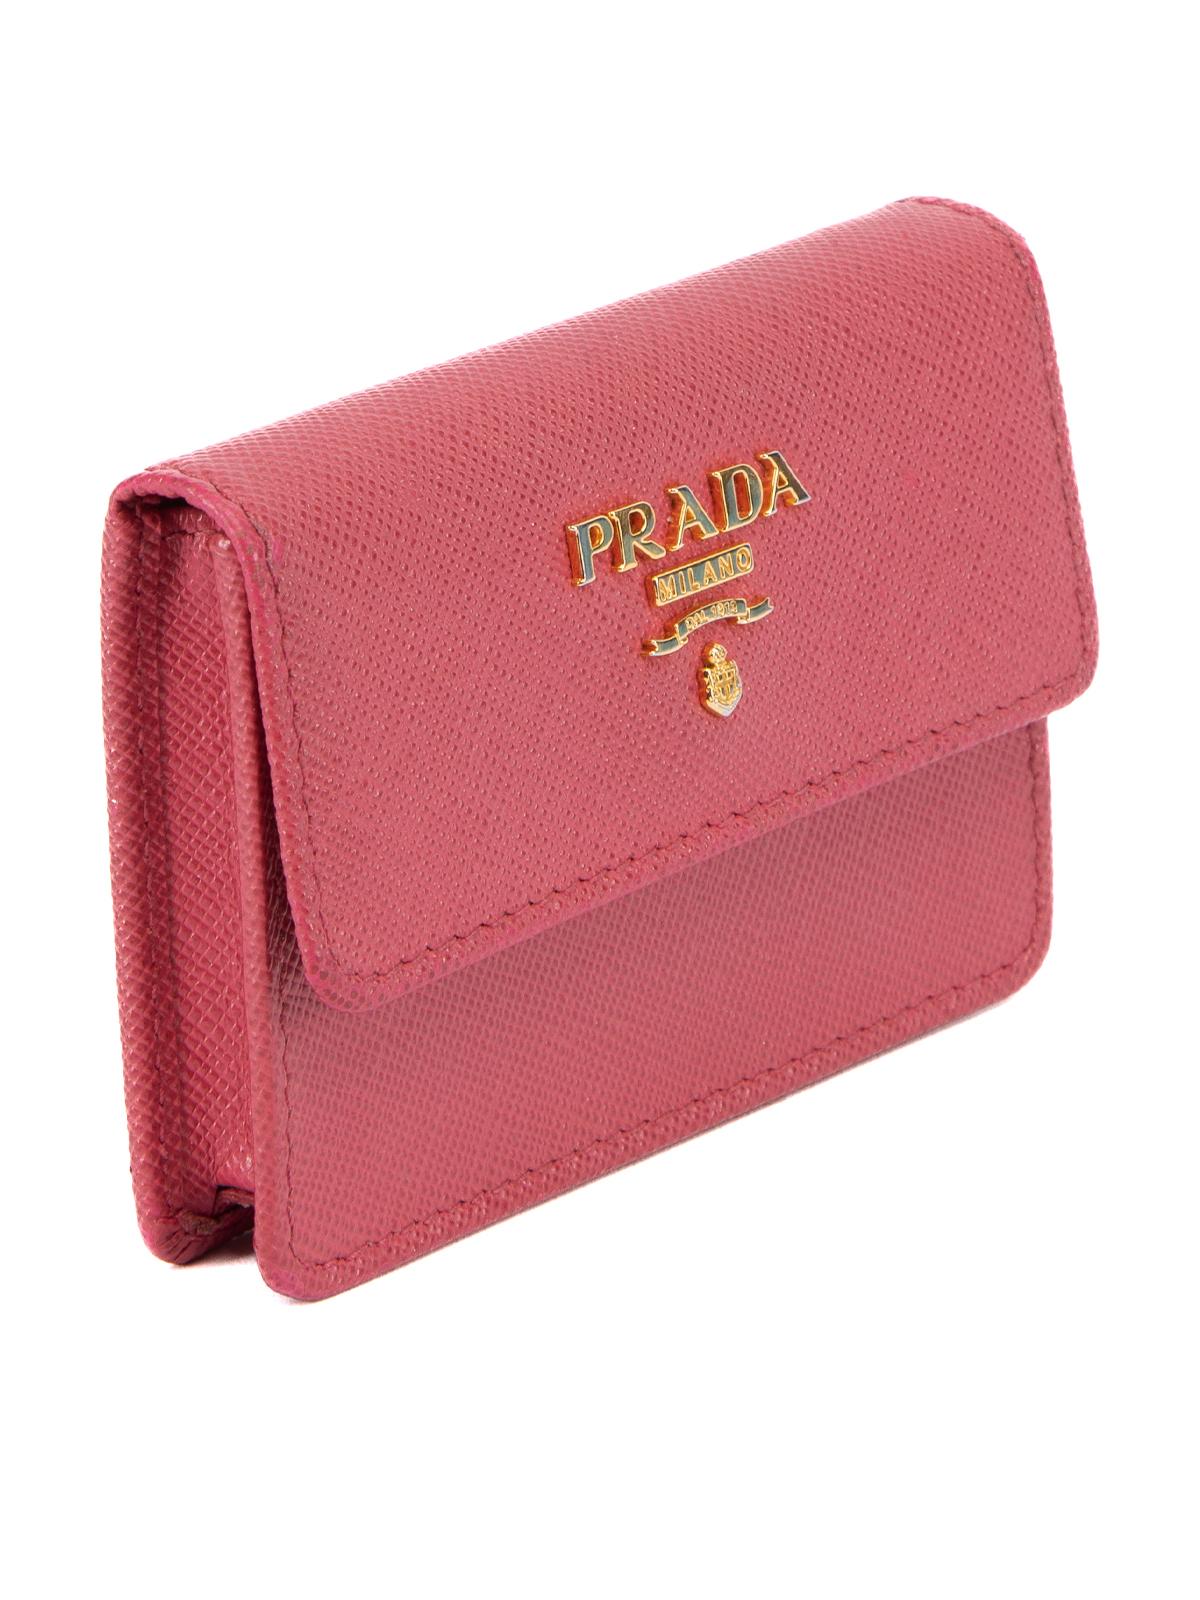 CONDITION is Very good. Minimal wear to coin purse is evident. Minimal wear to leather exterior and the gold logo on this used Prada designer resale item. Details Pink Berry Leather Gold tone hardware Flap Button fastening Made in Italy Composition